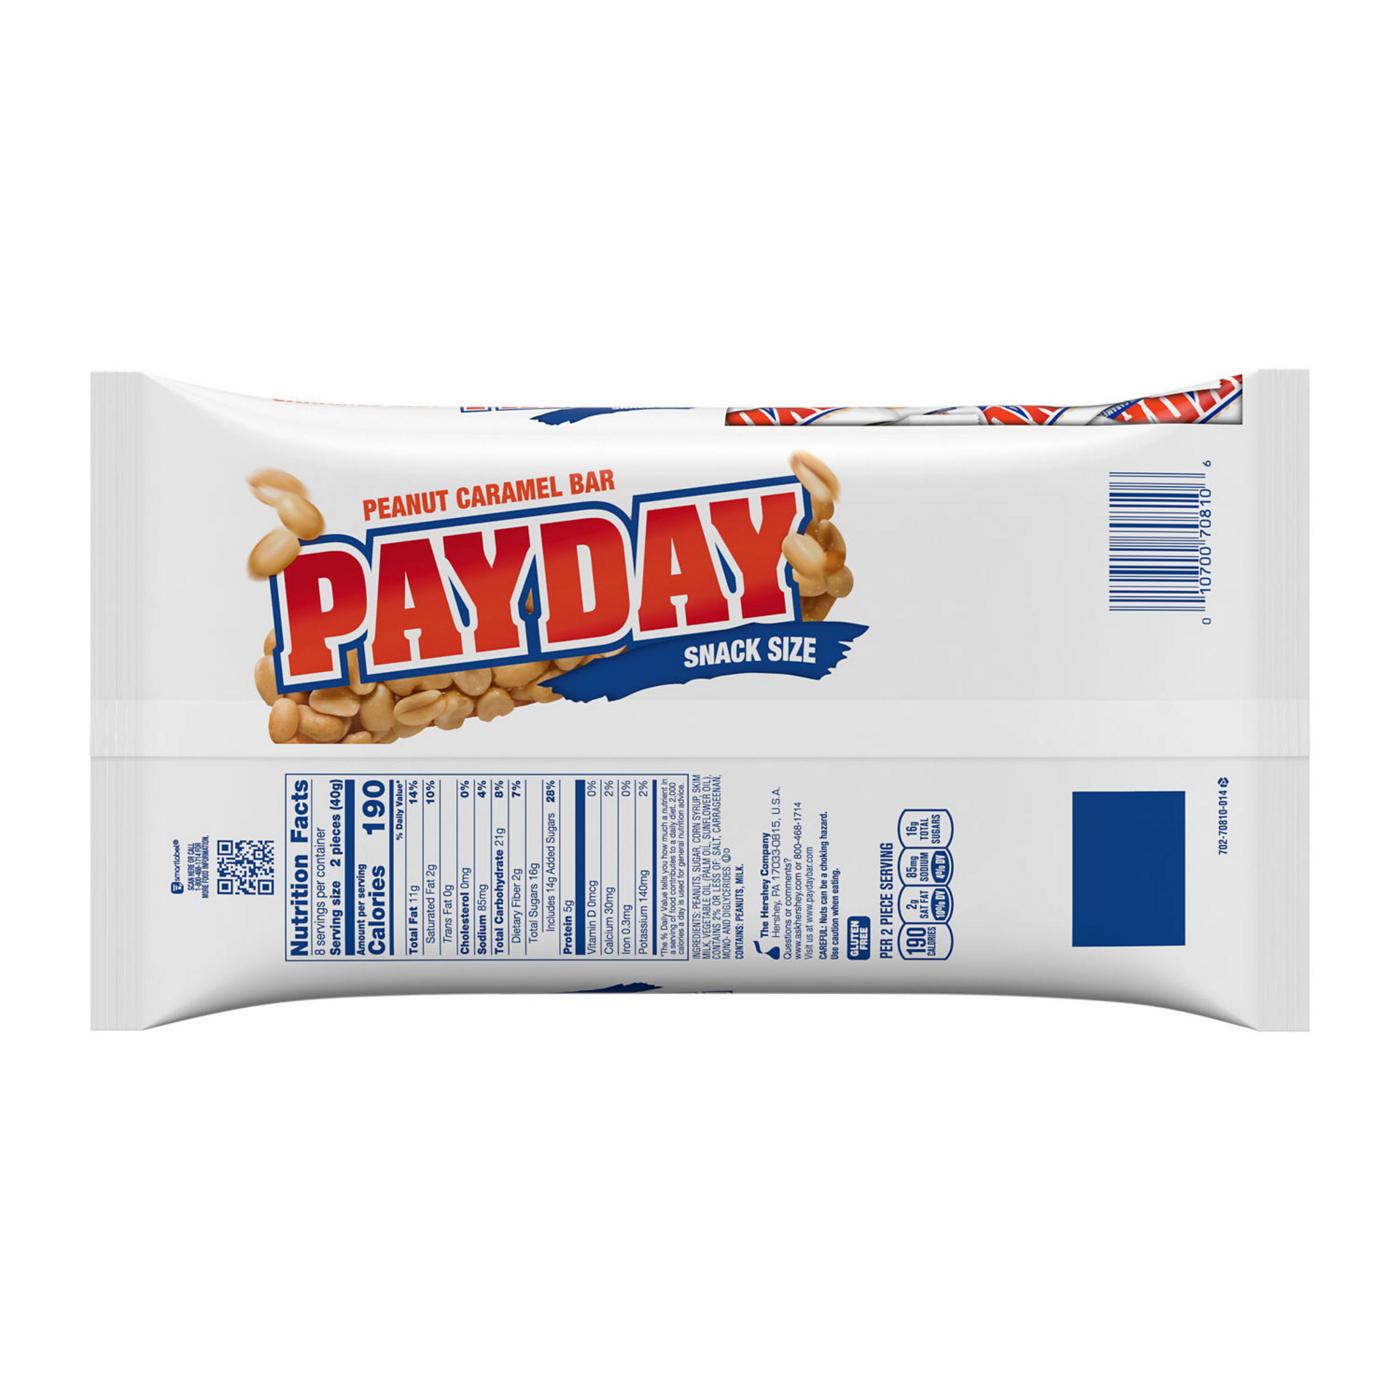 Payday Peanut Caramel Snack Size Candy; image 2 of 5